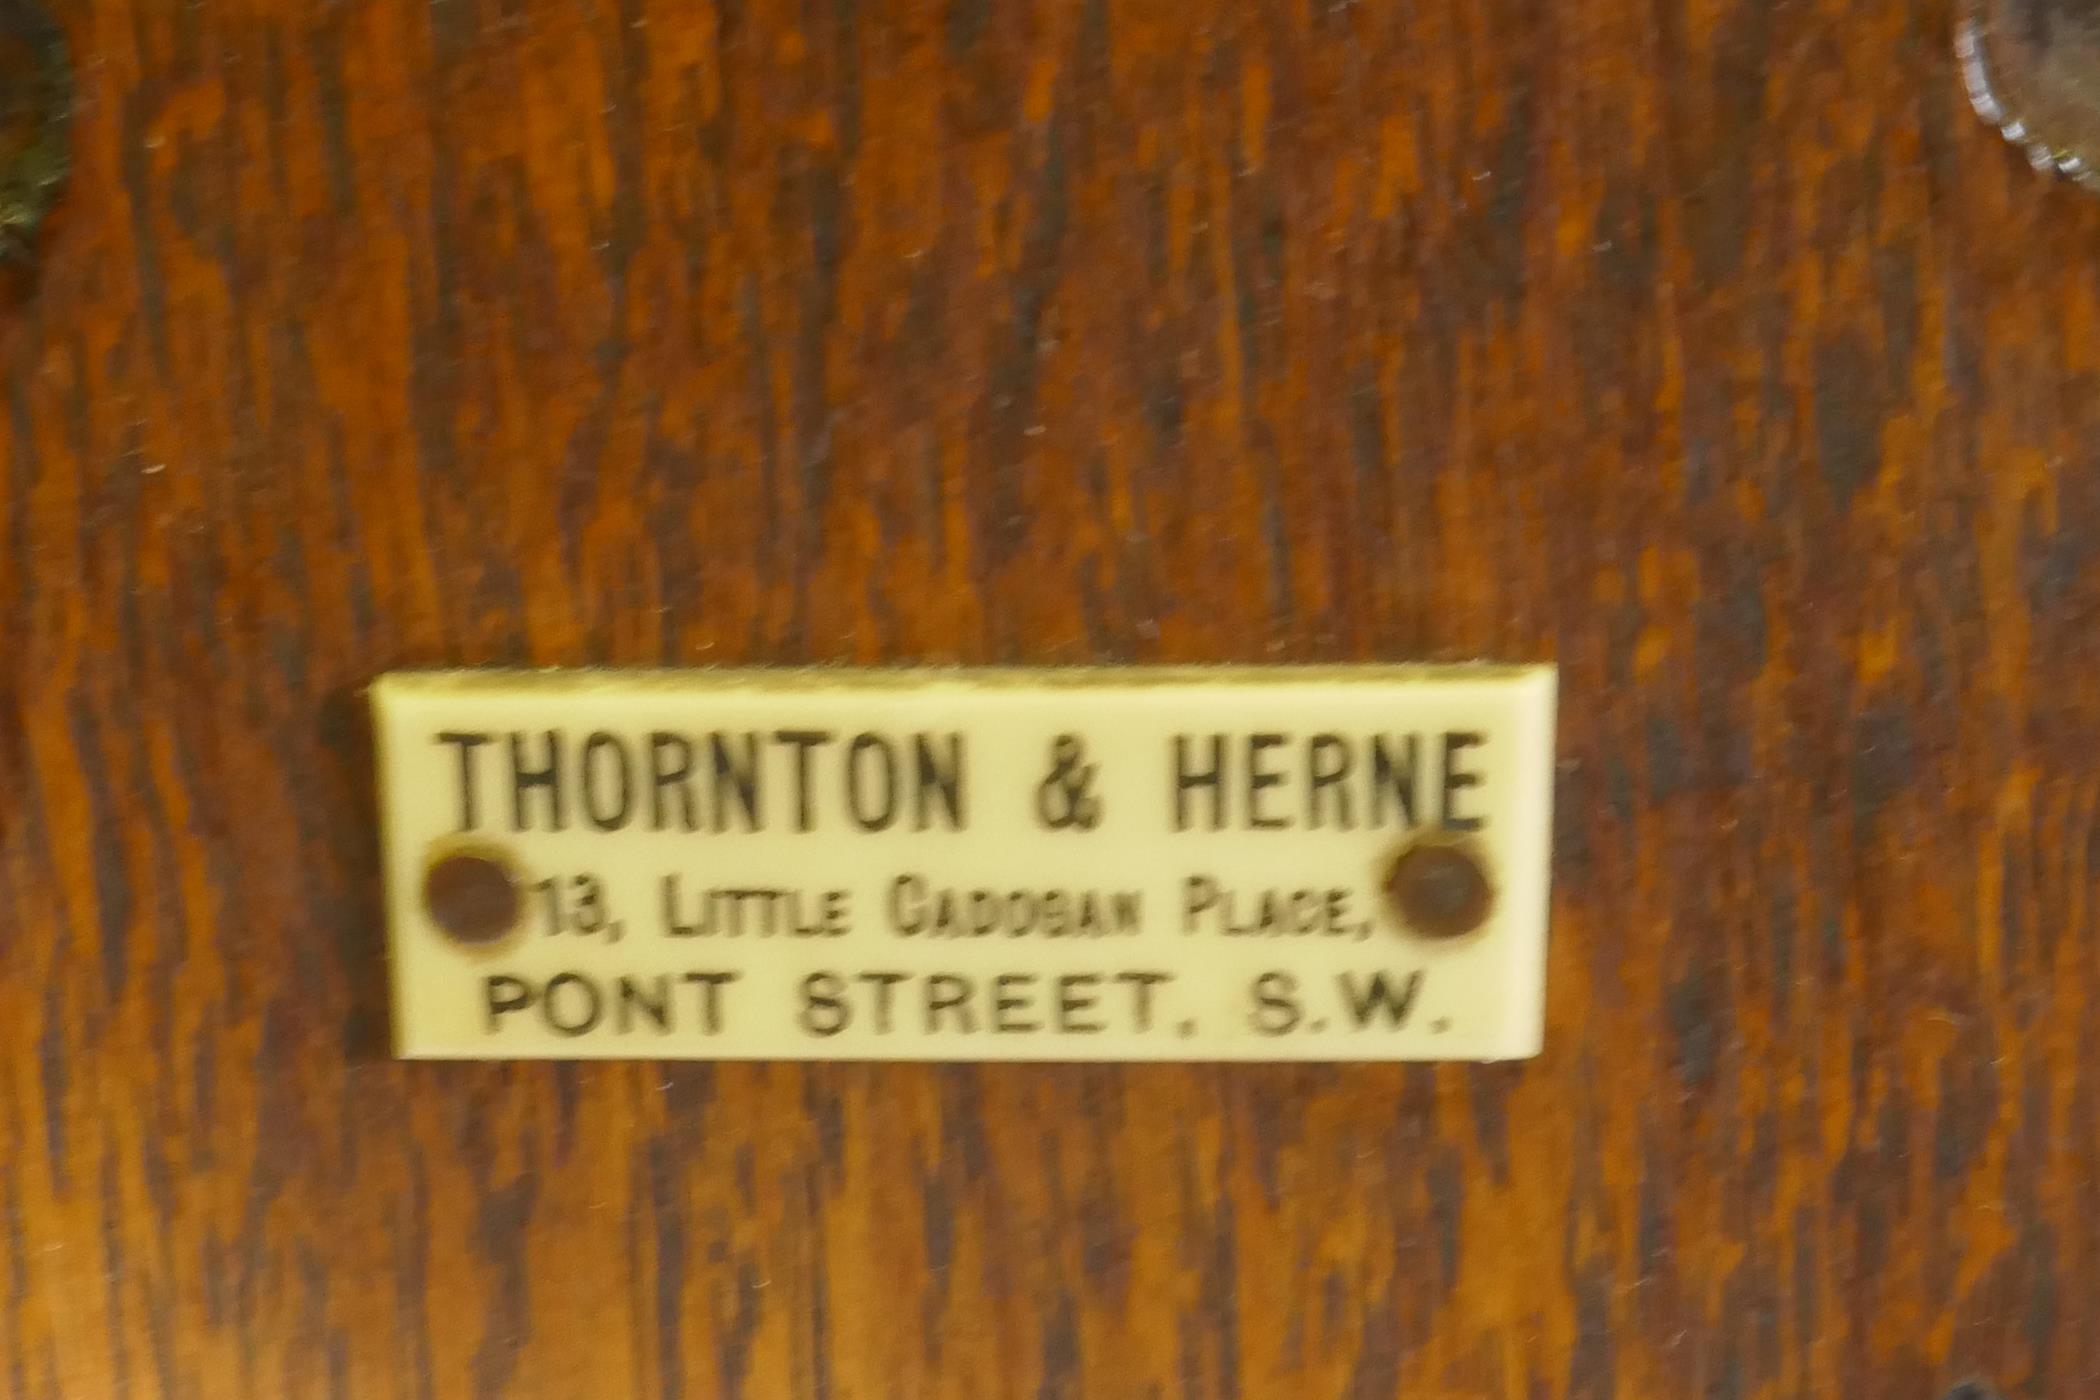 An early C20th beechwood coaching table, bears label Thornton & Herne, 13 Little Cadogan Place, Pont - Image 4 of 4